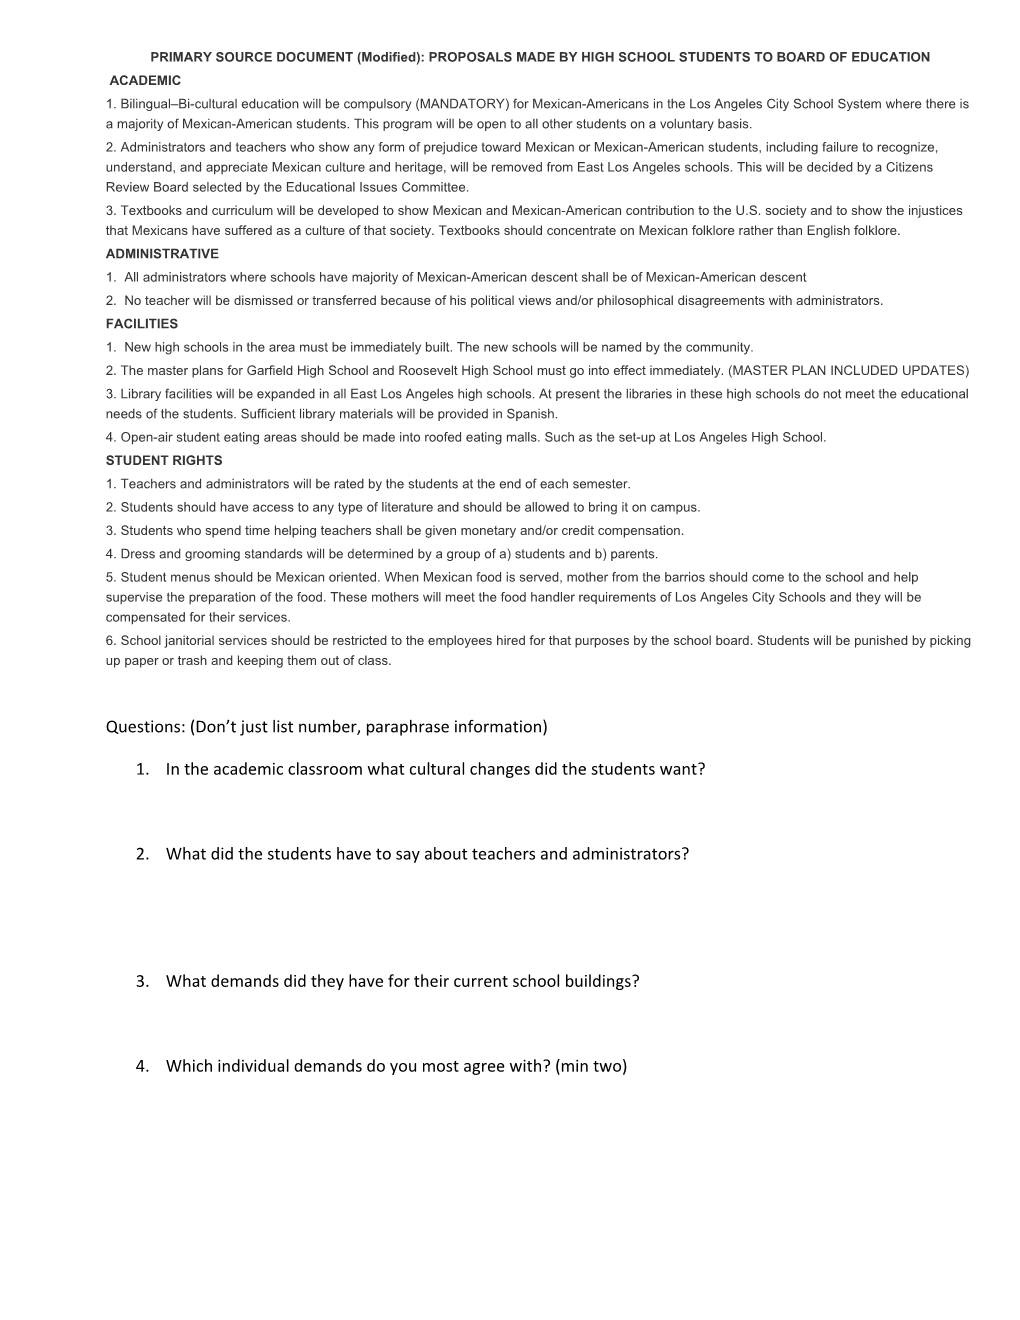 PRIMARY SOURCE DOCUMENT (Modified): PROPOSALS MADE by HIGH SCHOOL STUDENTS to BOARD OF